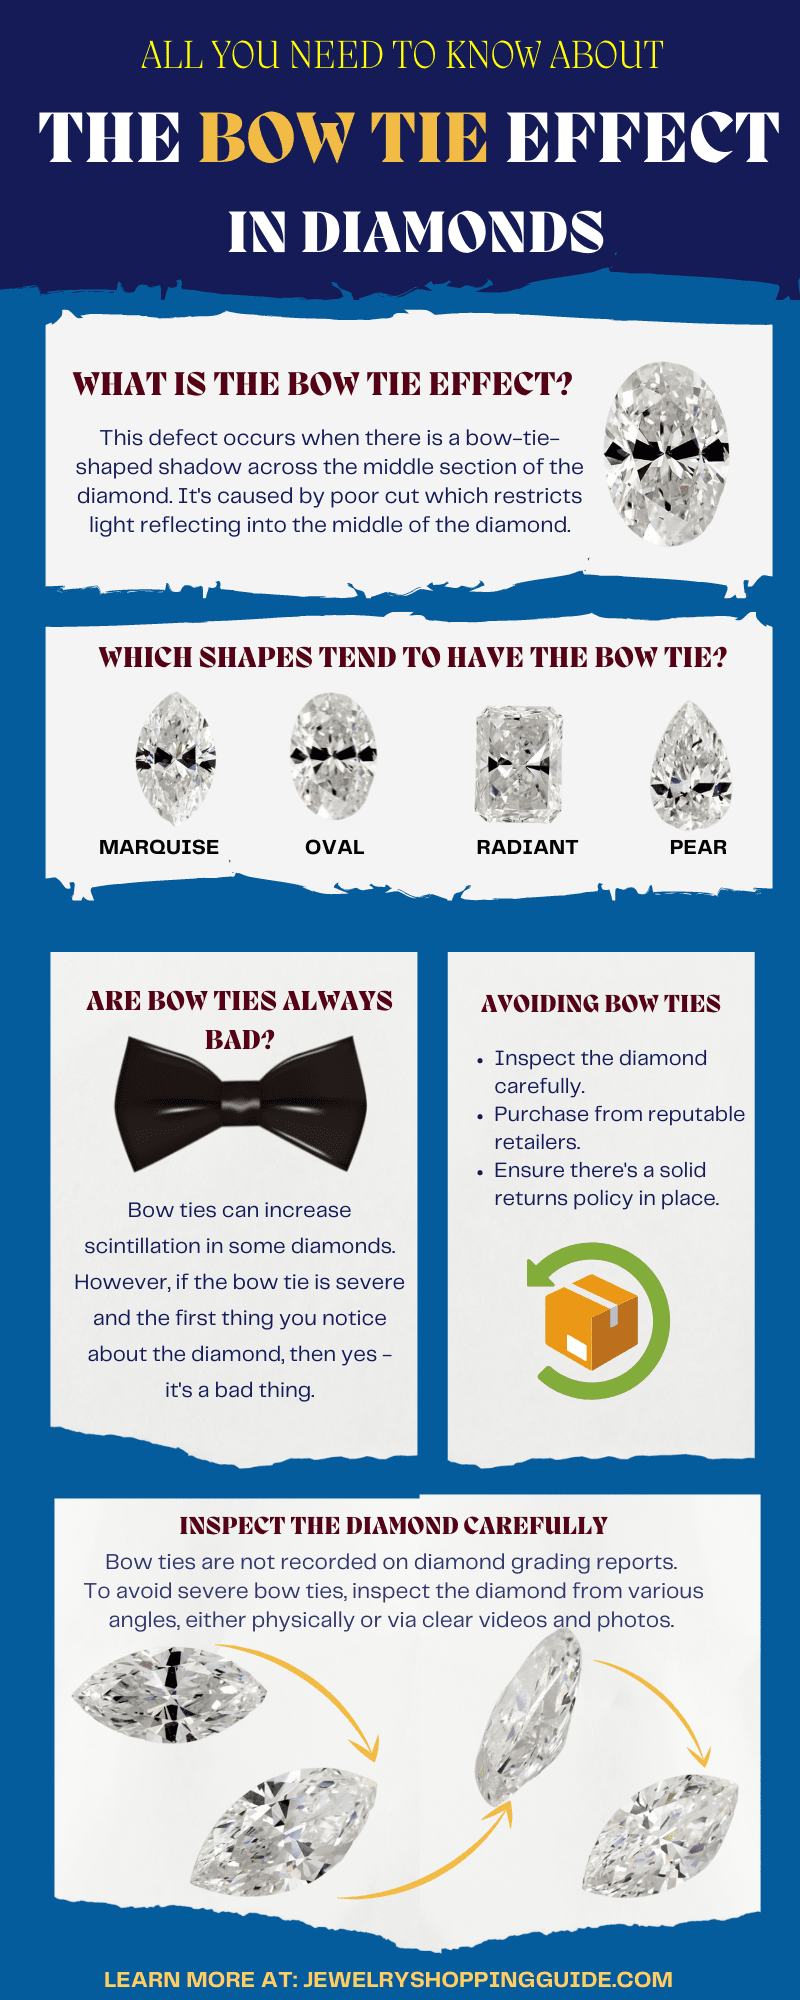 What is the bow tie effect in diamonds?